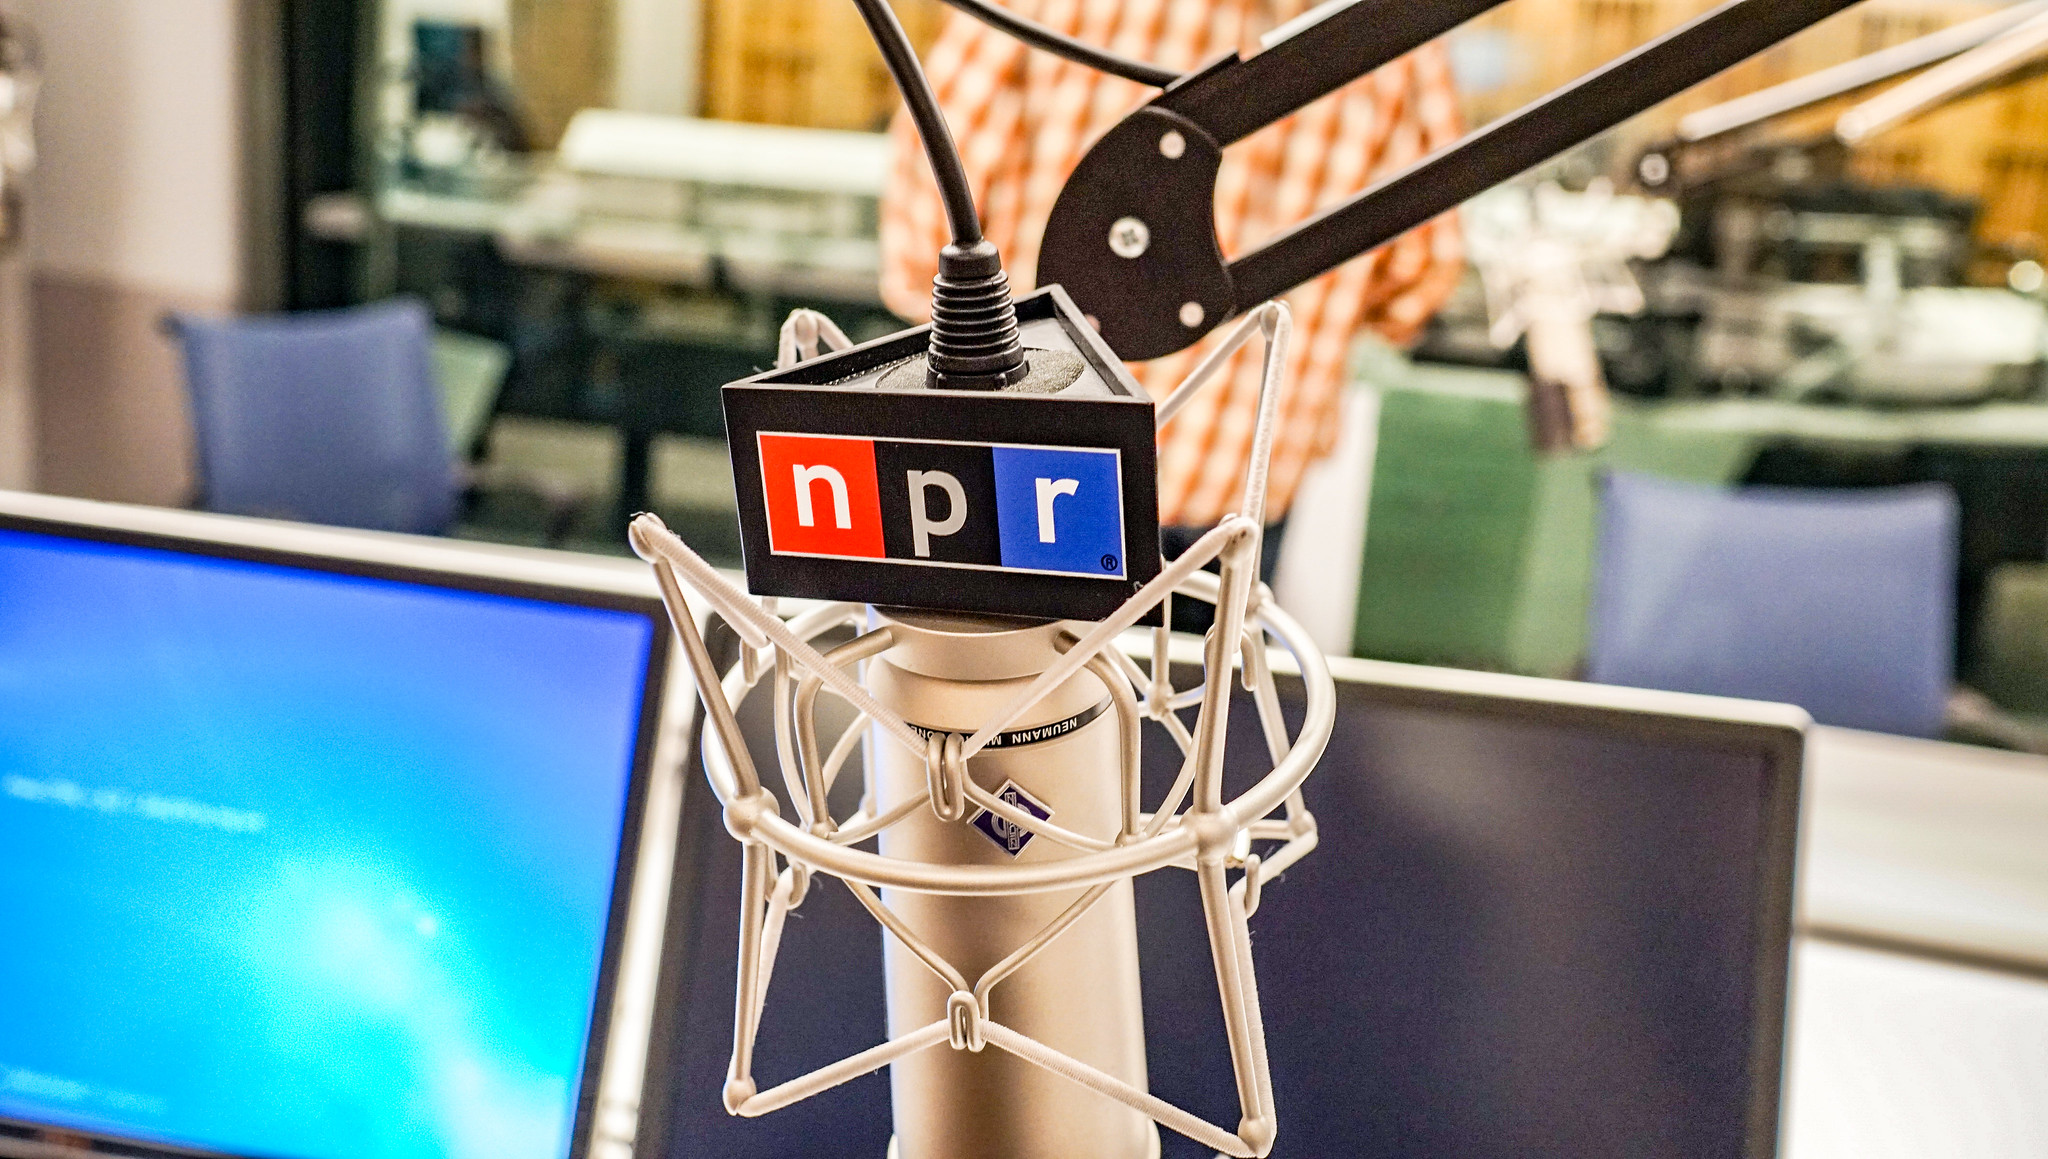 To gain credibility with NPR executives, Uri Berliner may consider identifying as Black and gay